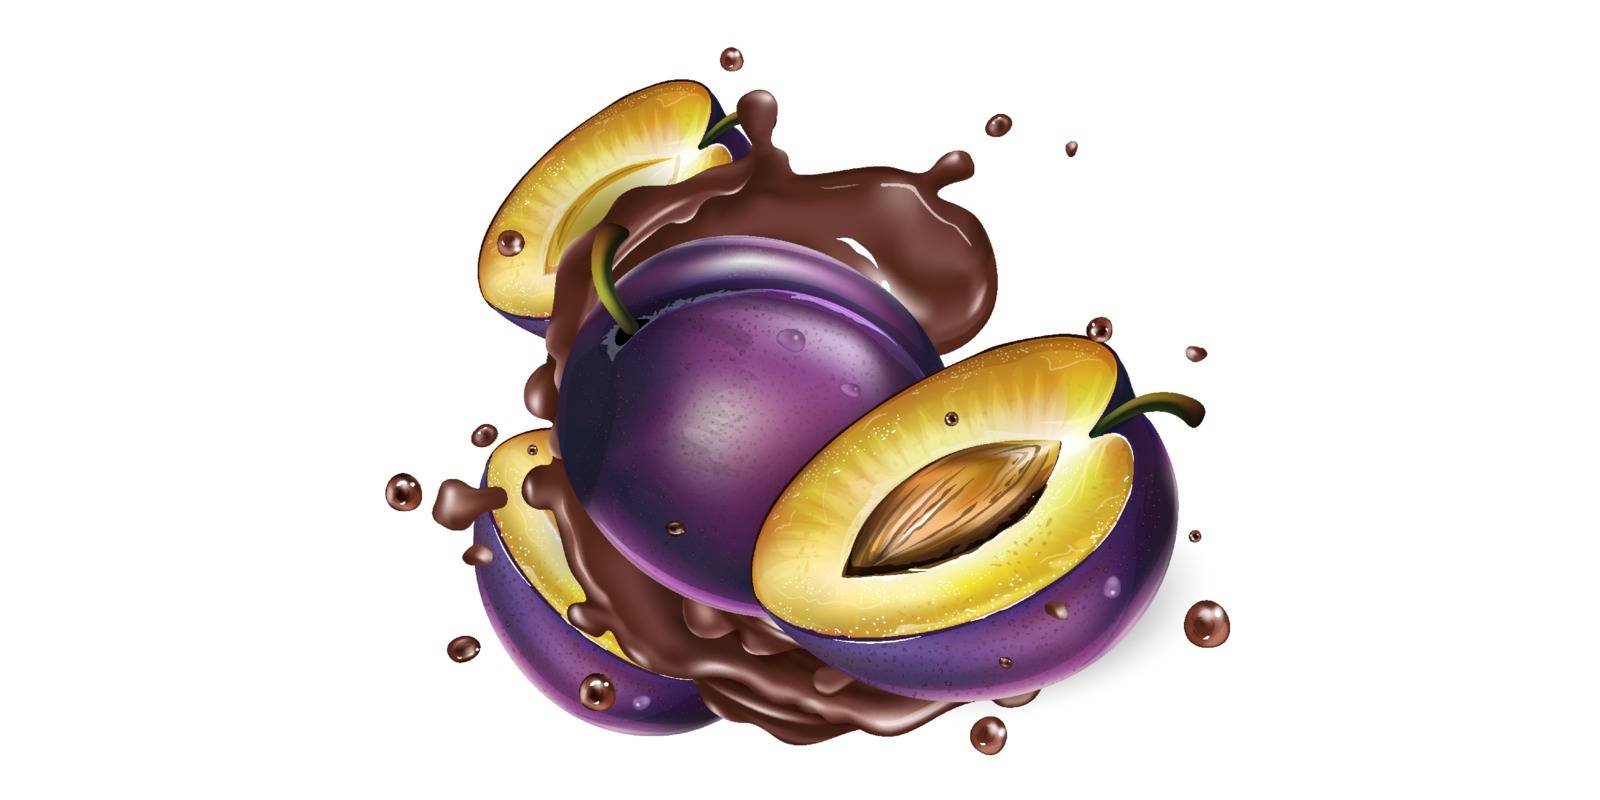 Whole and sliced plums in chocolate splashes on a white background. Realistic vector illustration.